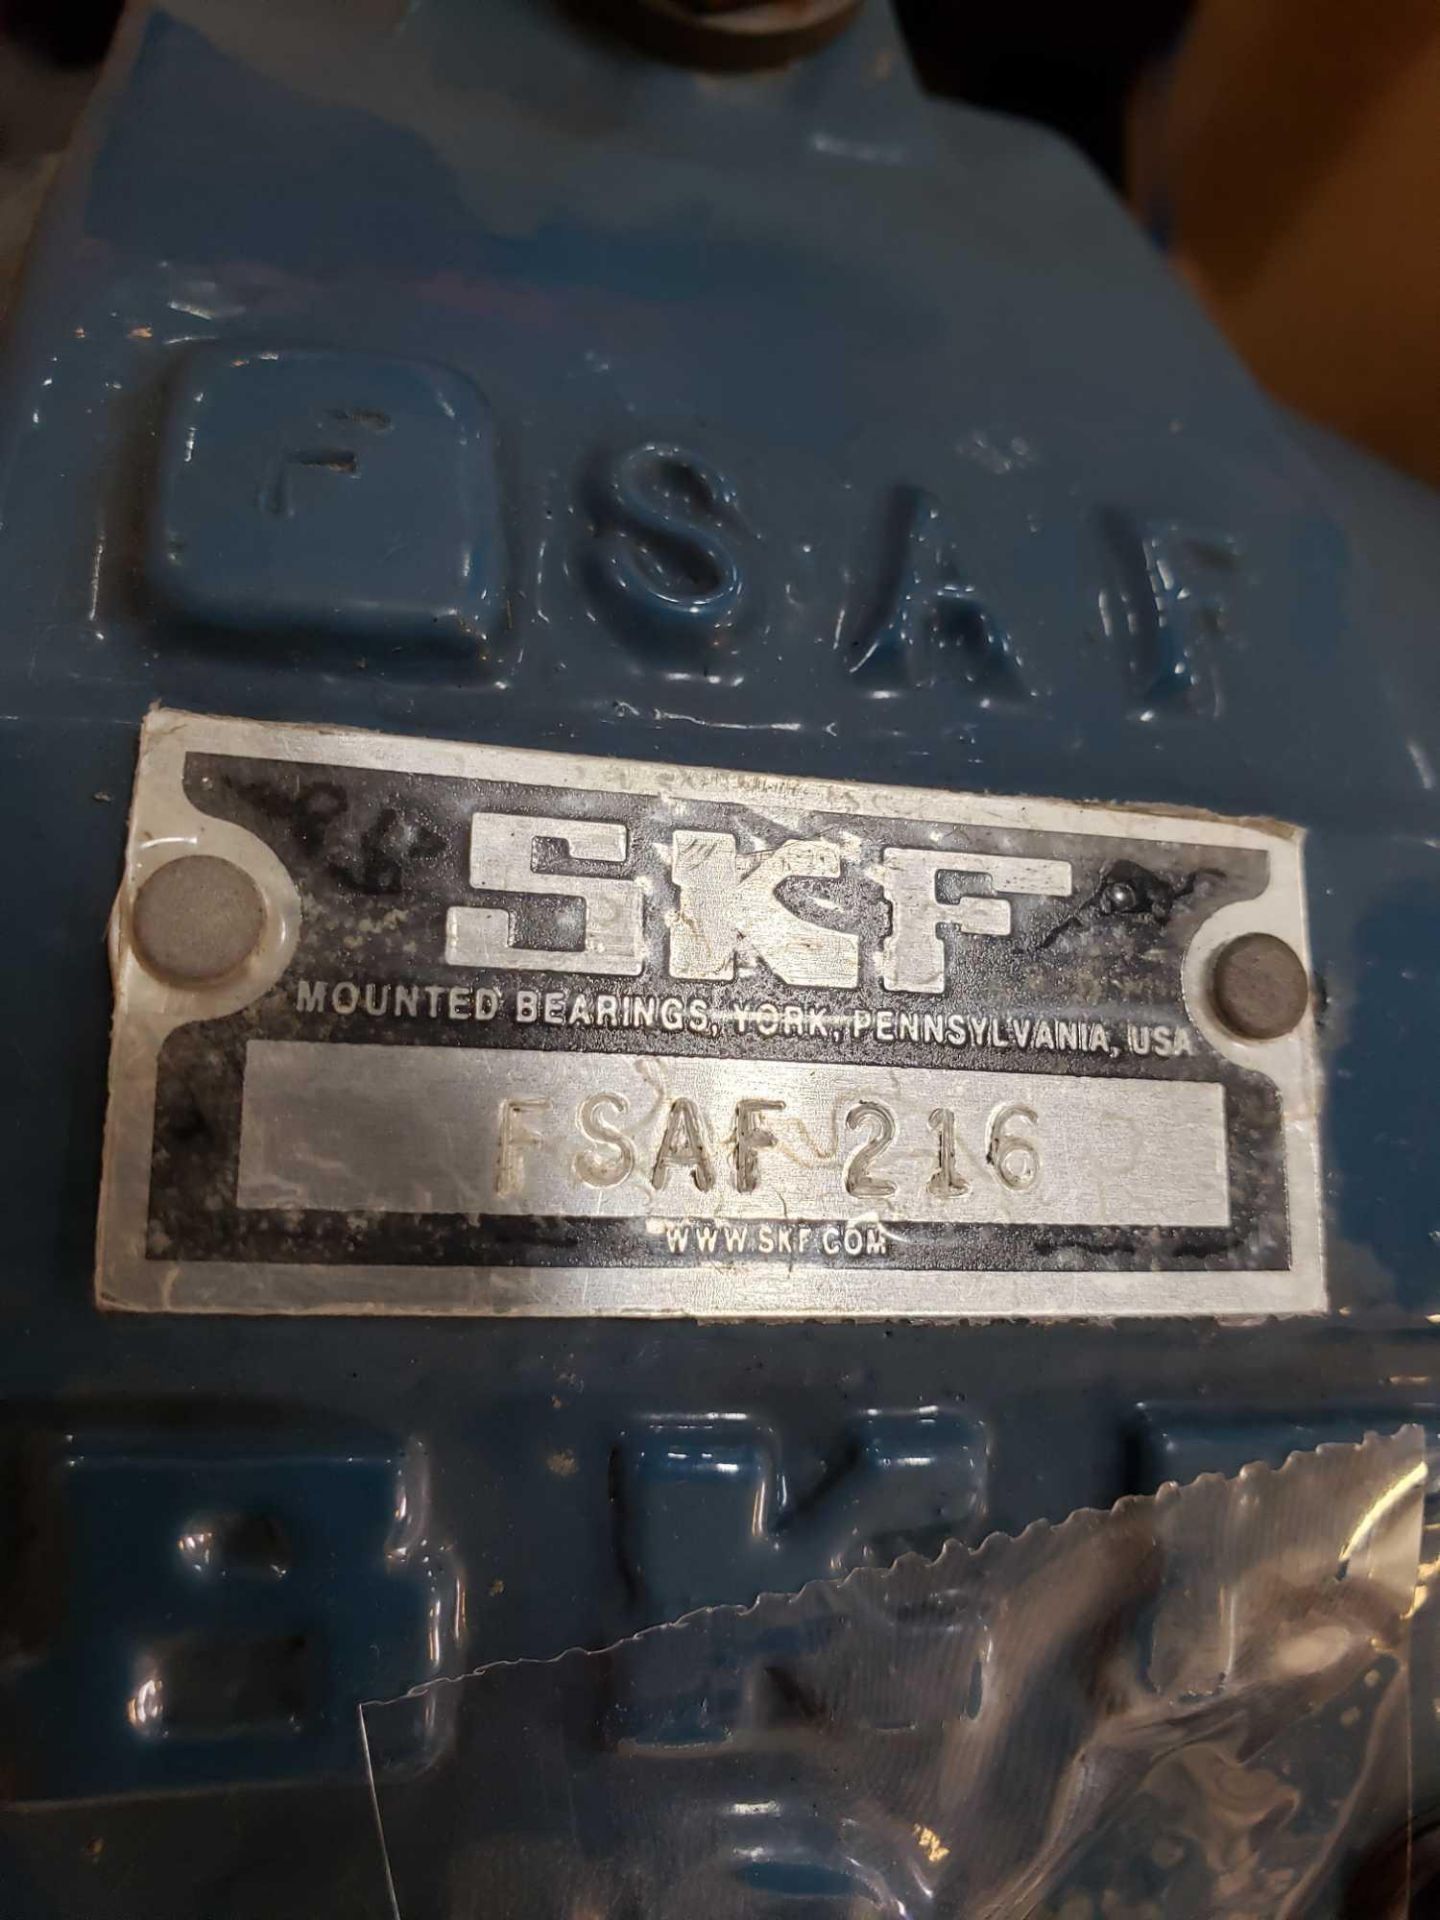 SKF Bearing Part number SAF-216. New, but dusty from storage. - Image 2 of 2